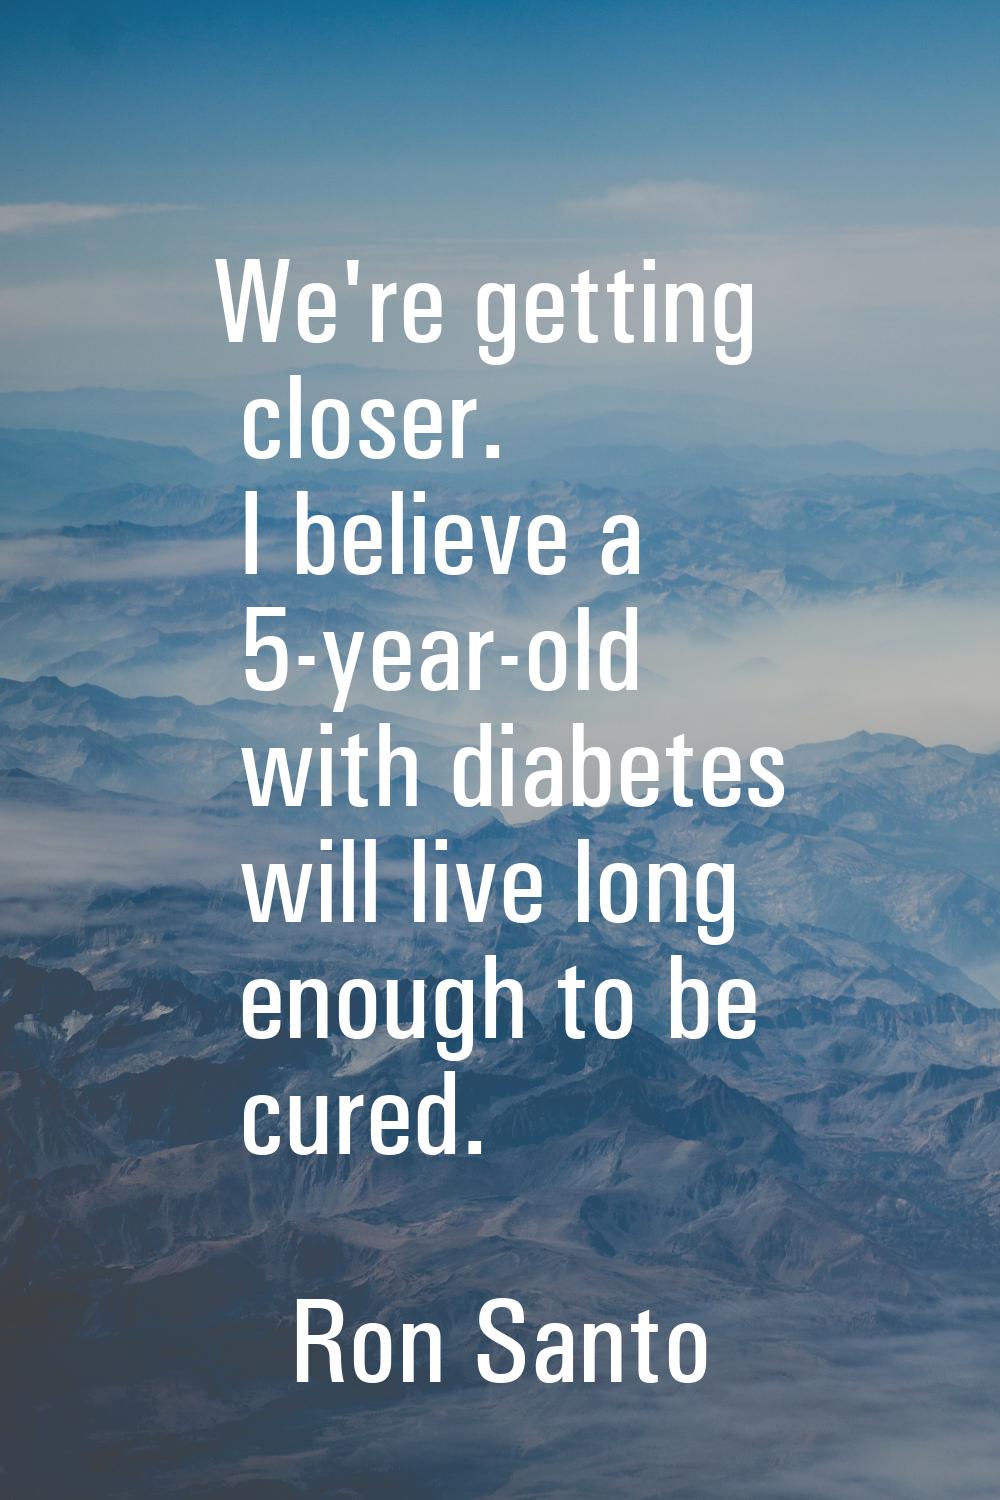 We're getting closer. I believe a 5-year-old with diabetes will live long enough to be cured.